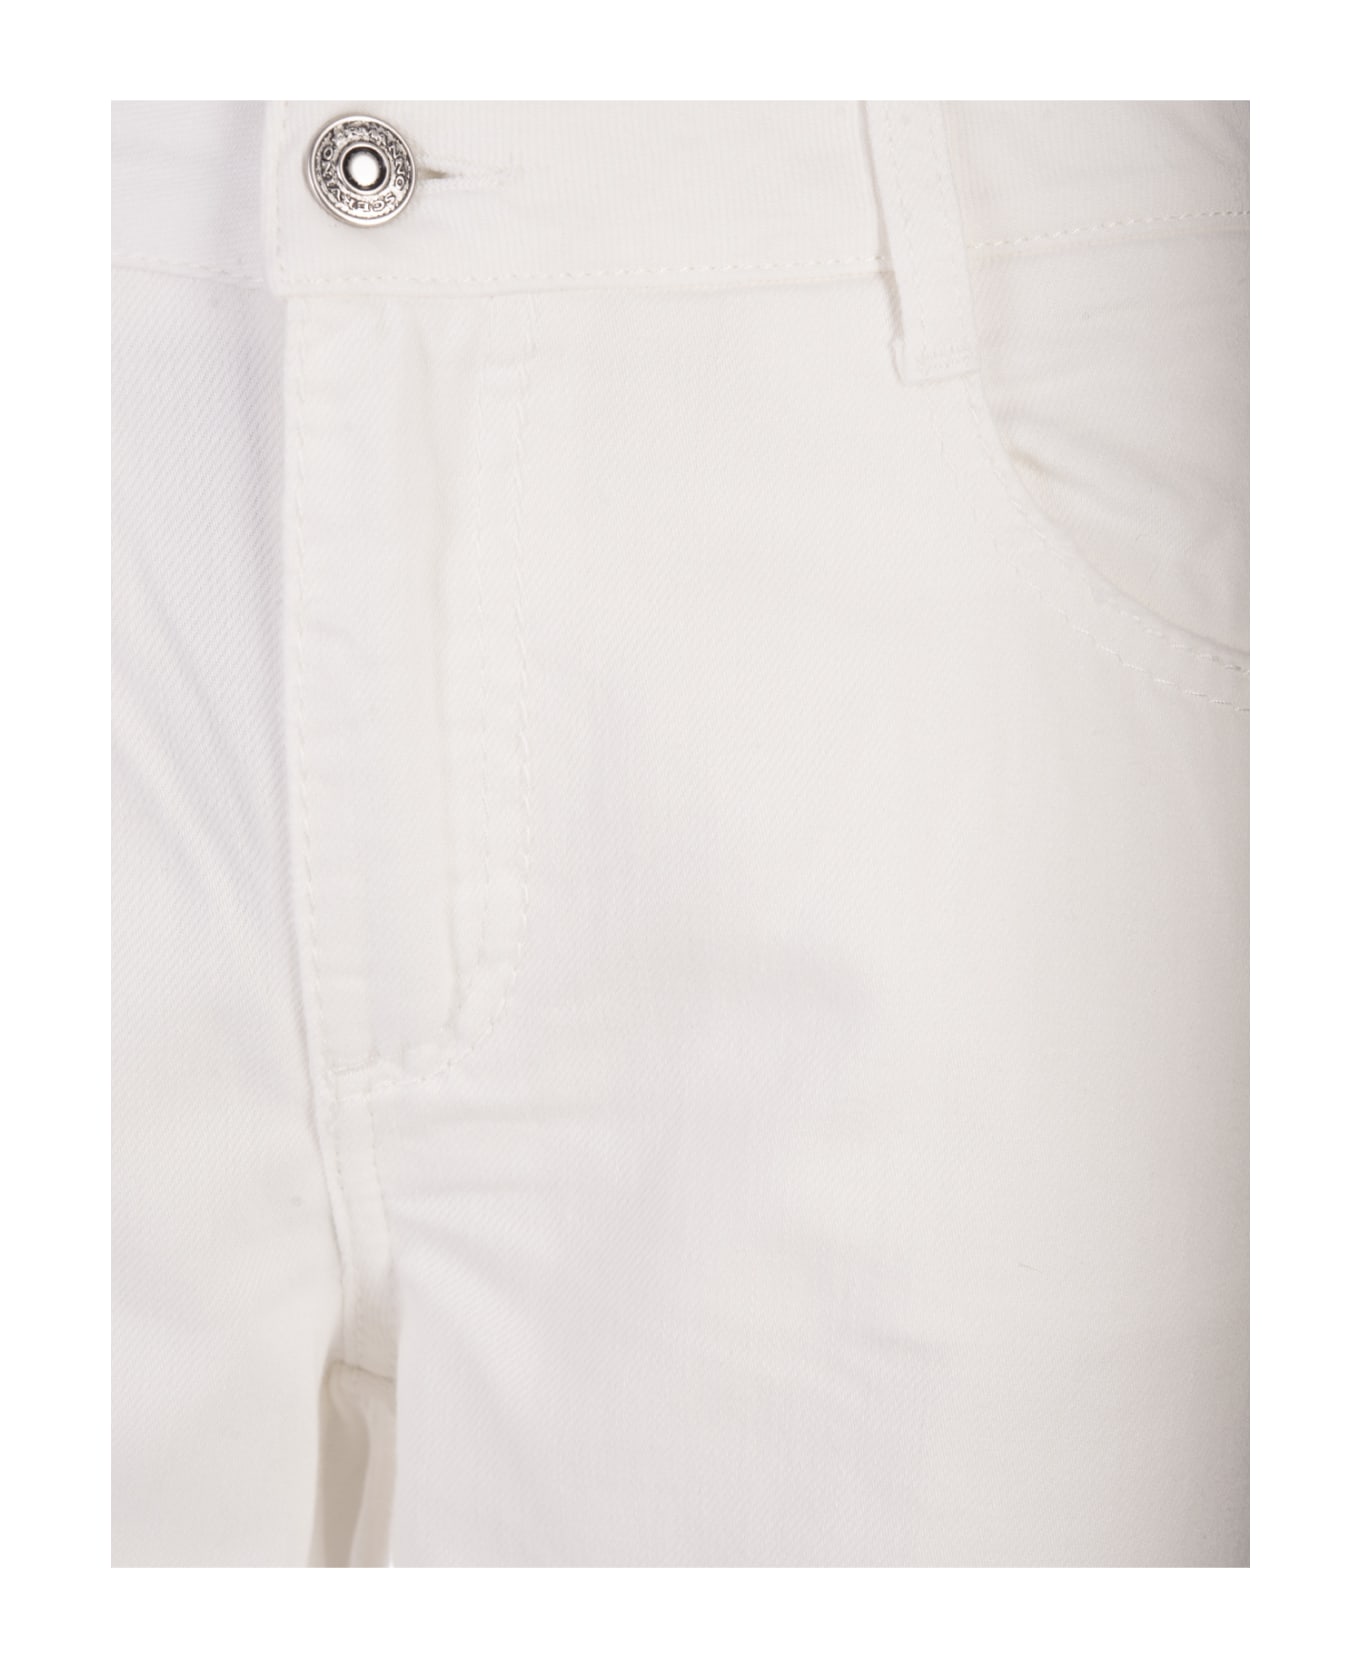 Ermanno Scervino White Bootcut Jeans With Sangallo Lace Cut-outs - White ボトムス